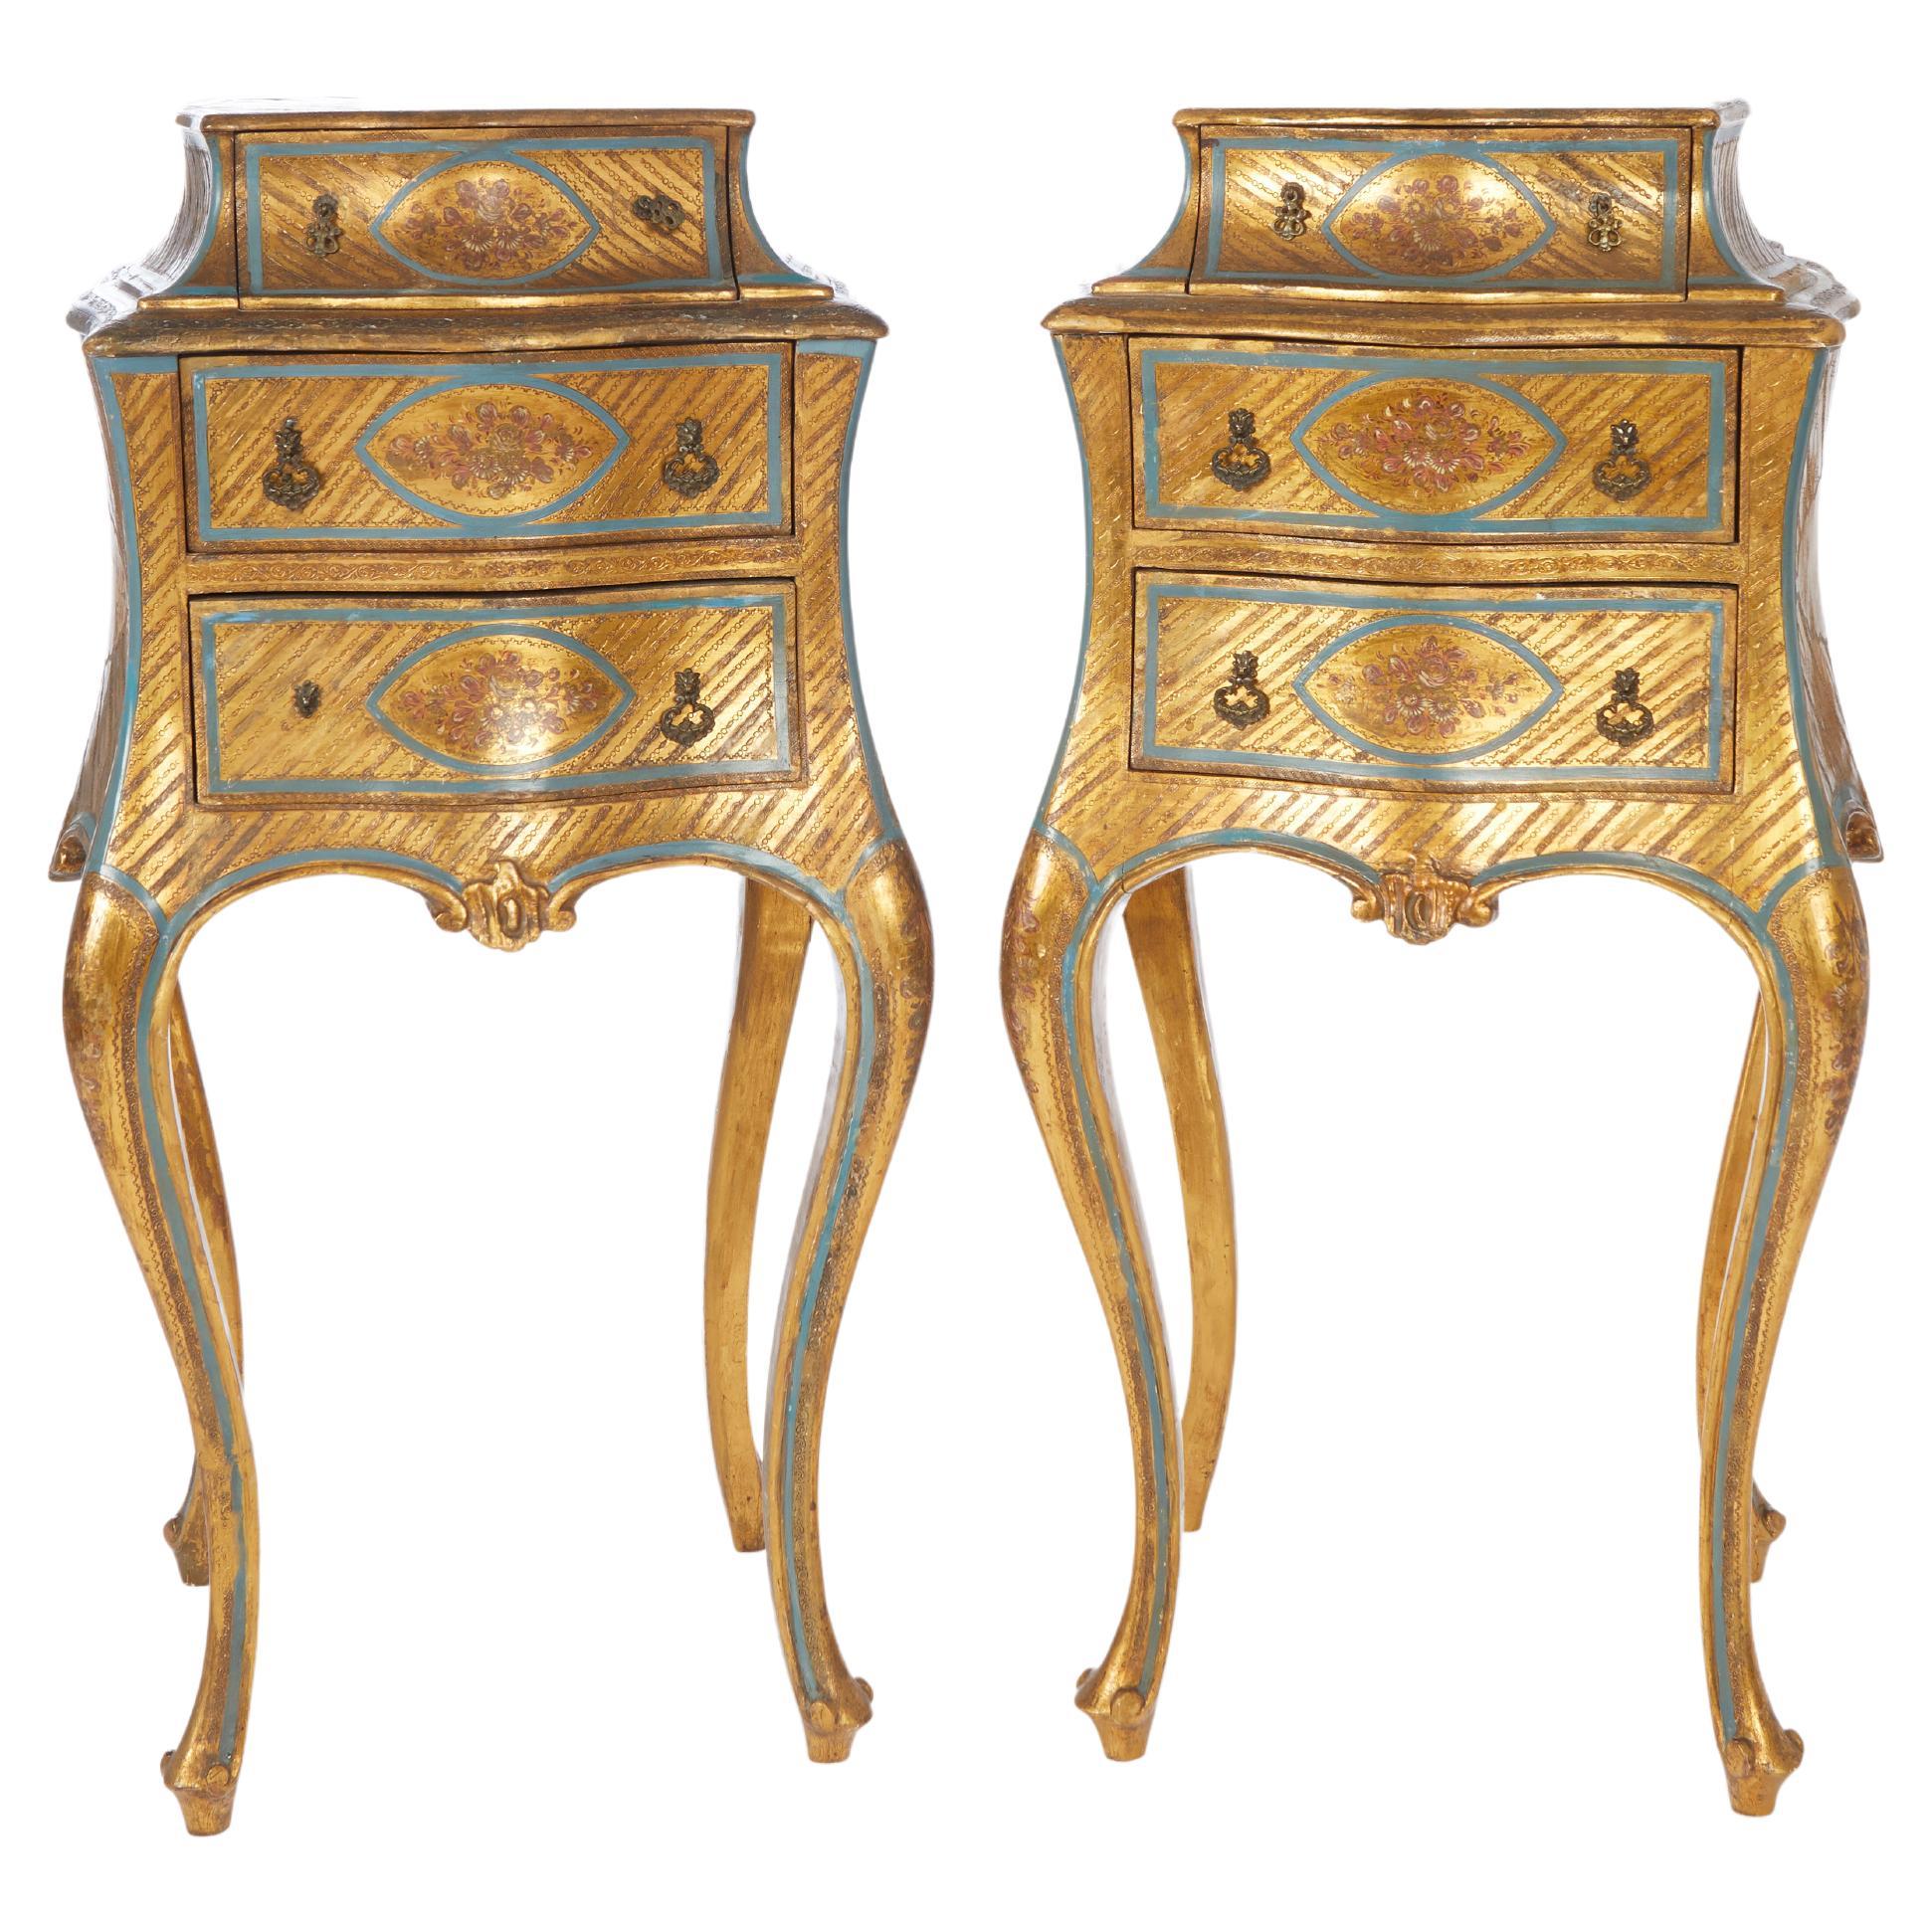 Pair of Italian Side Tables with Gilt Decorations